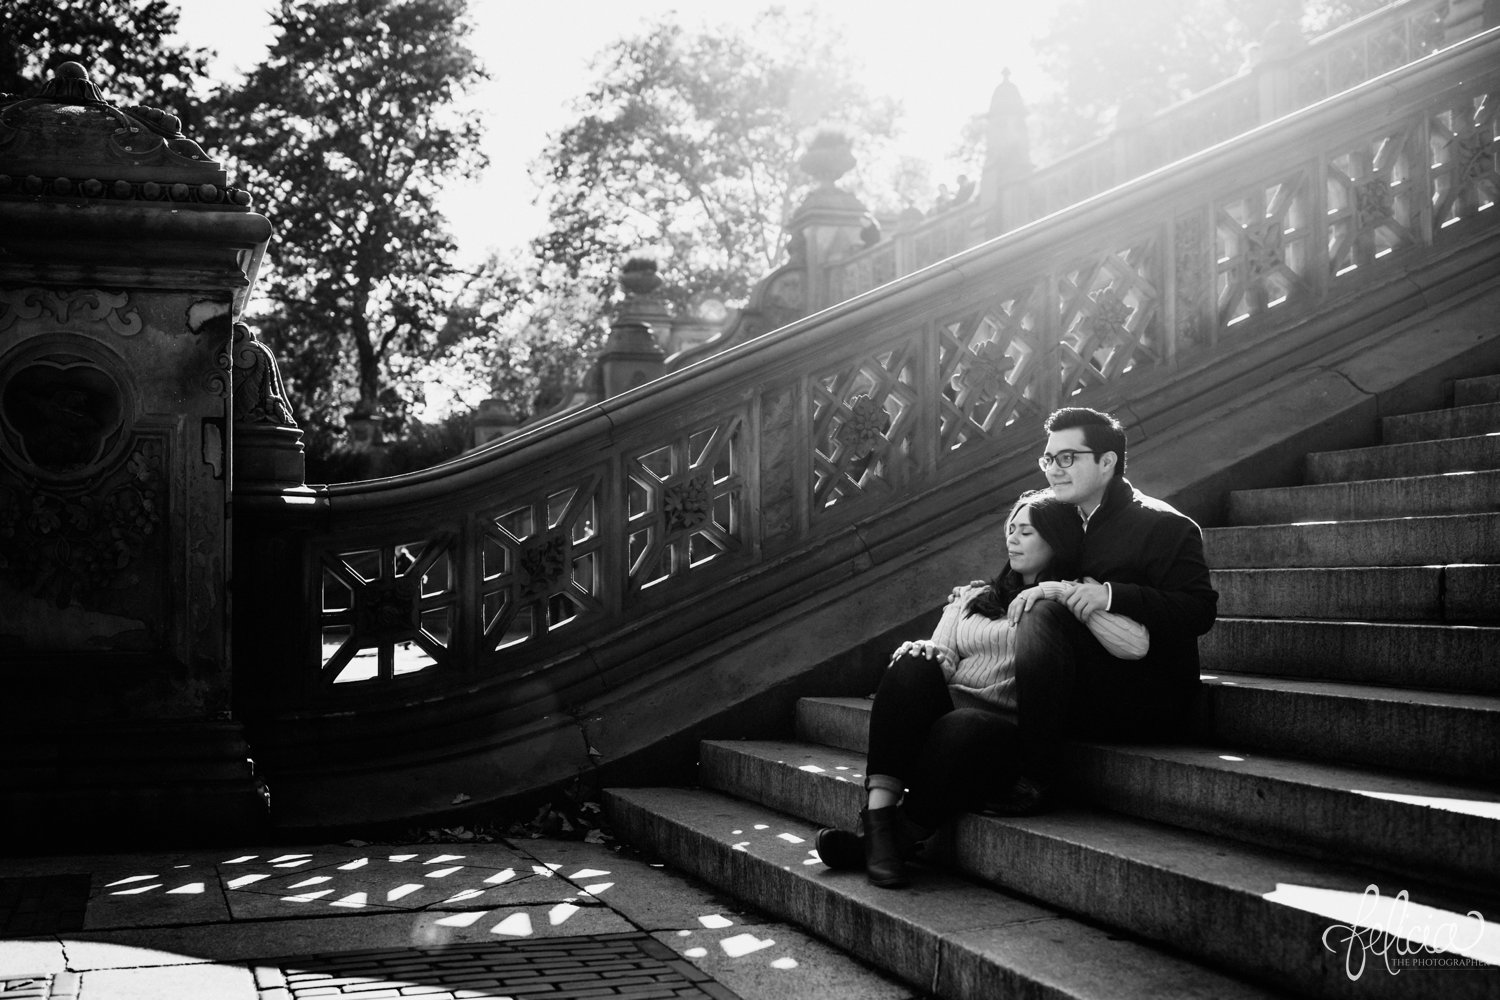 images by feliciathephotographer.com | destination wedding photographer | engagement | new york city | central park | downtown | urban | casual | classic | romantic | preppy | autumn | fall leaves | diamond ring | black and white | 